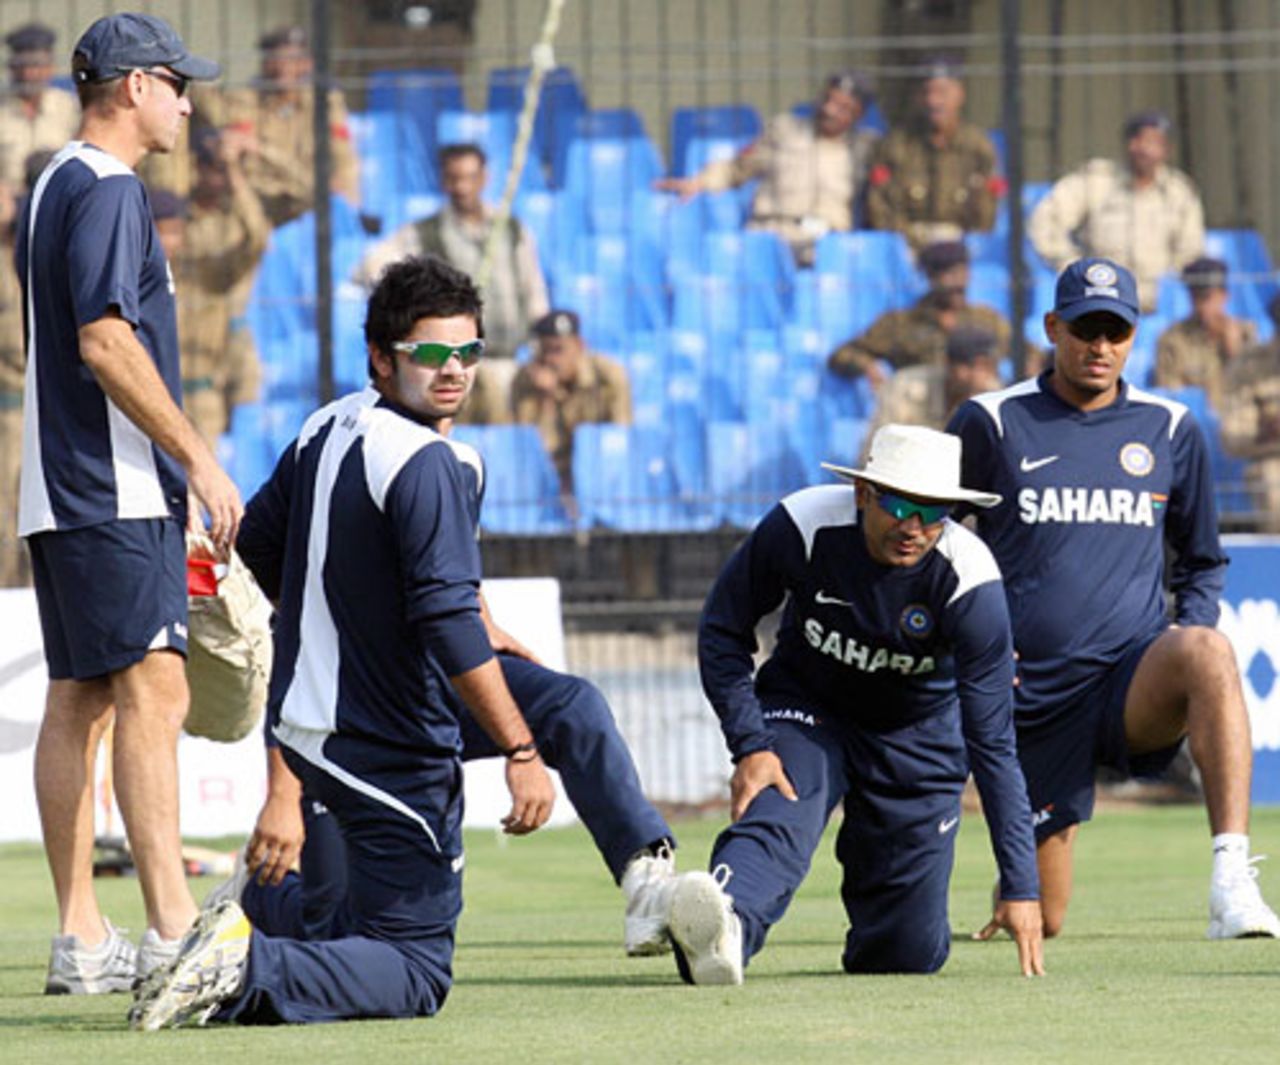 Virat Kohli, Virender Sehwag, and Yusuf Pathan train on the eve of the second ODI against England, Indore, November 16, 2008